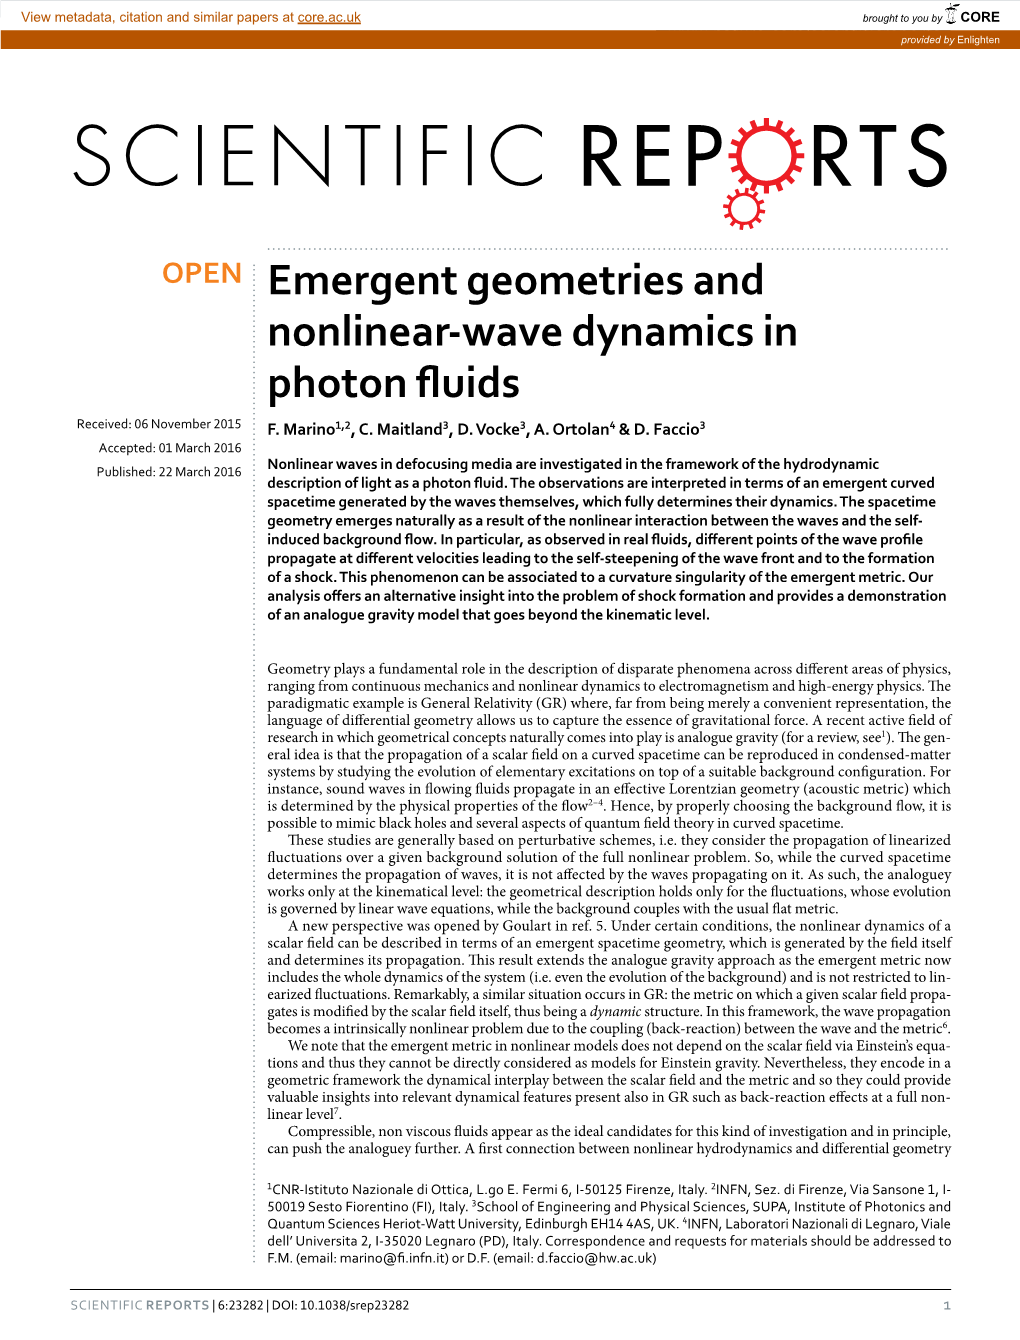 Emergent Geometries and Nonlinear-Wave Dynamics in Photon Fluids Received: 06 November 2015 F